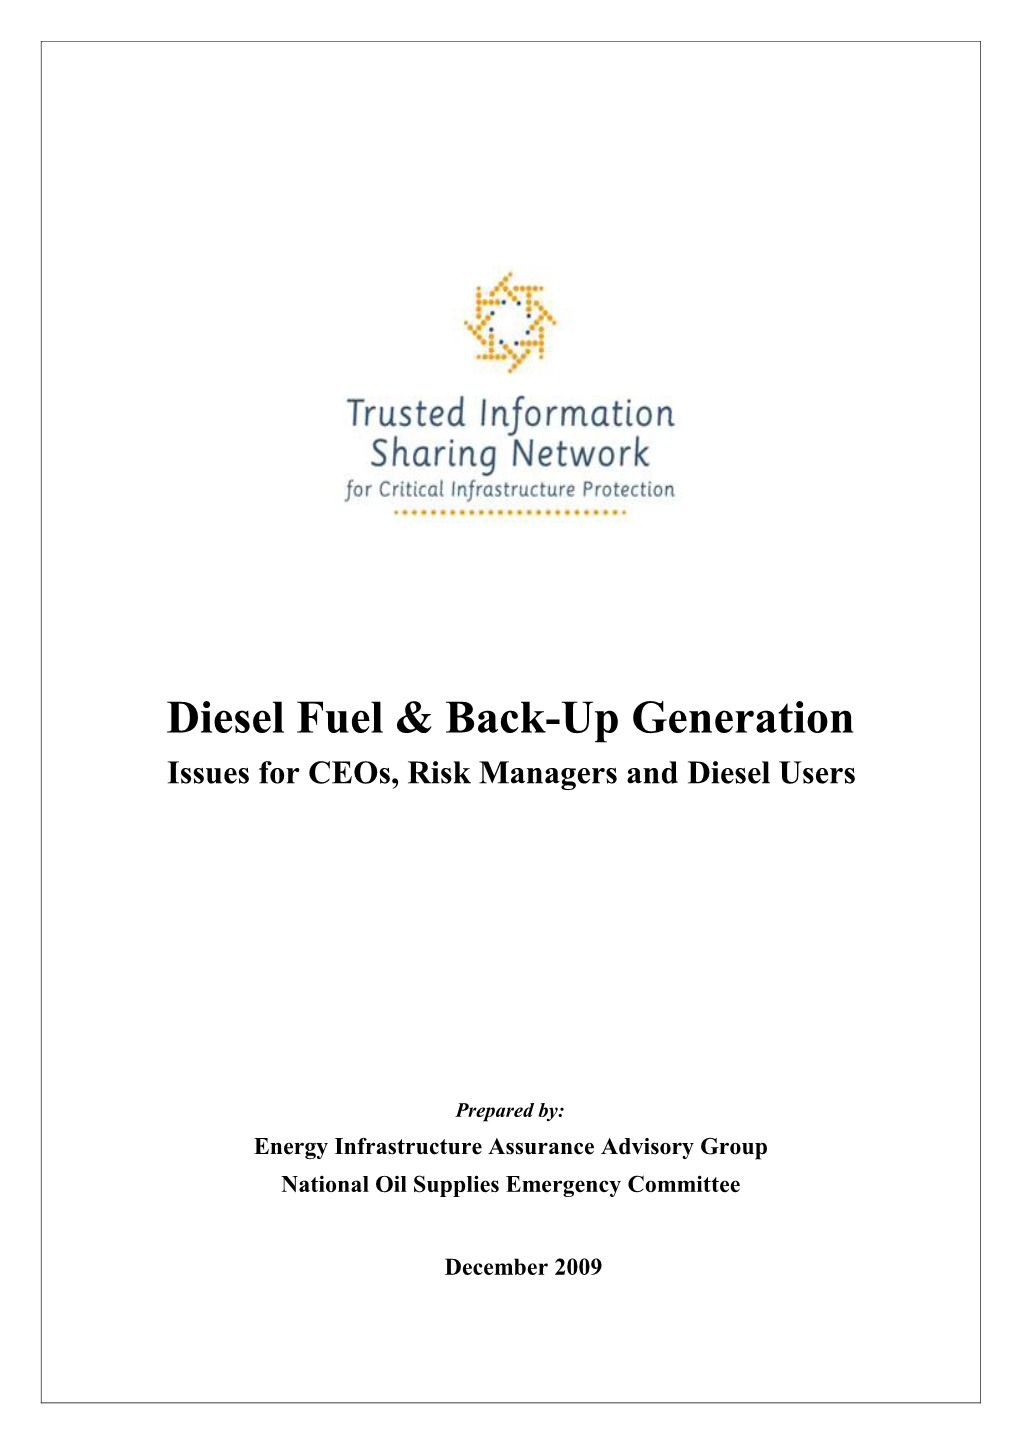 Diesel Fuel and Backup Generators Issues for Ceos and Risk Managers DOC 966KB